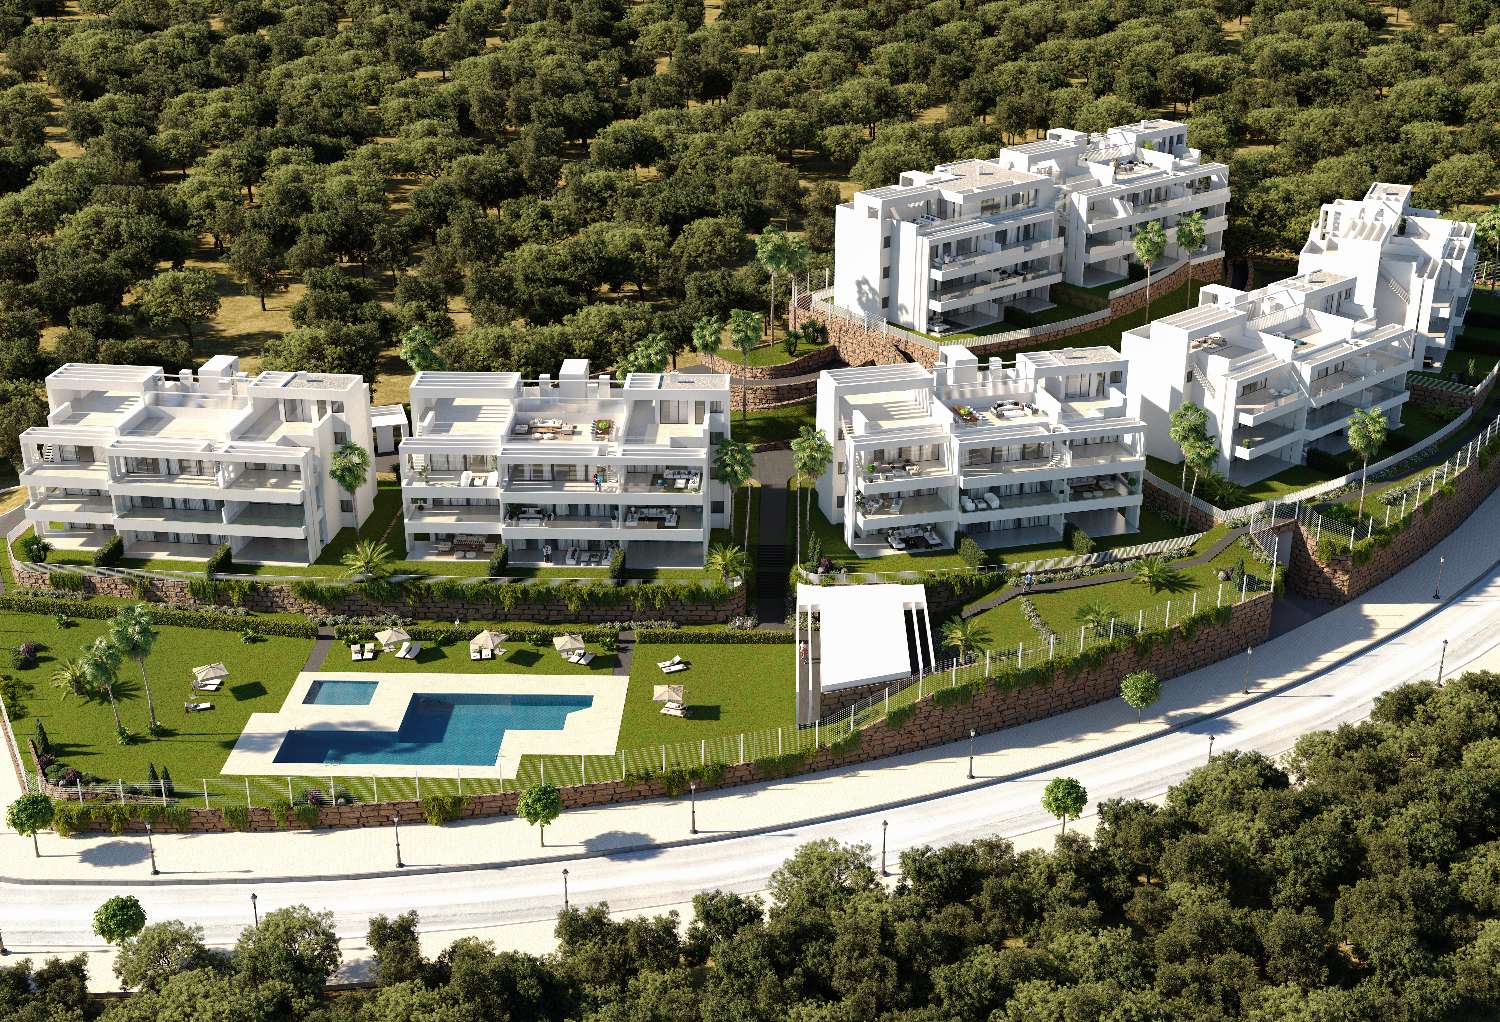 A true Mediterranean lifestyle, allowing residents to fully immerse themselves in the beautiful coastal environment. 3 bedroom starting price of 370,000€